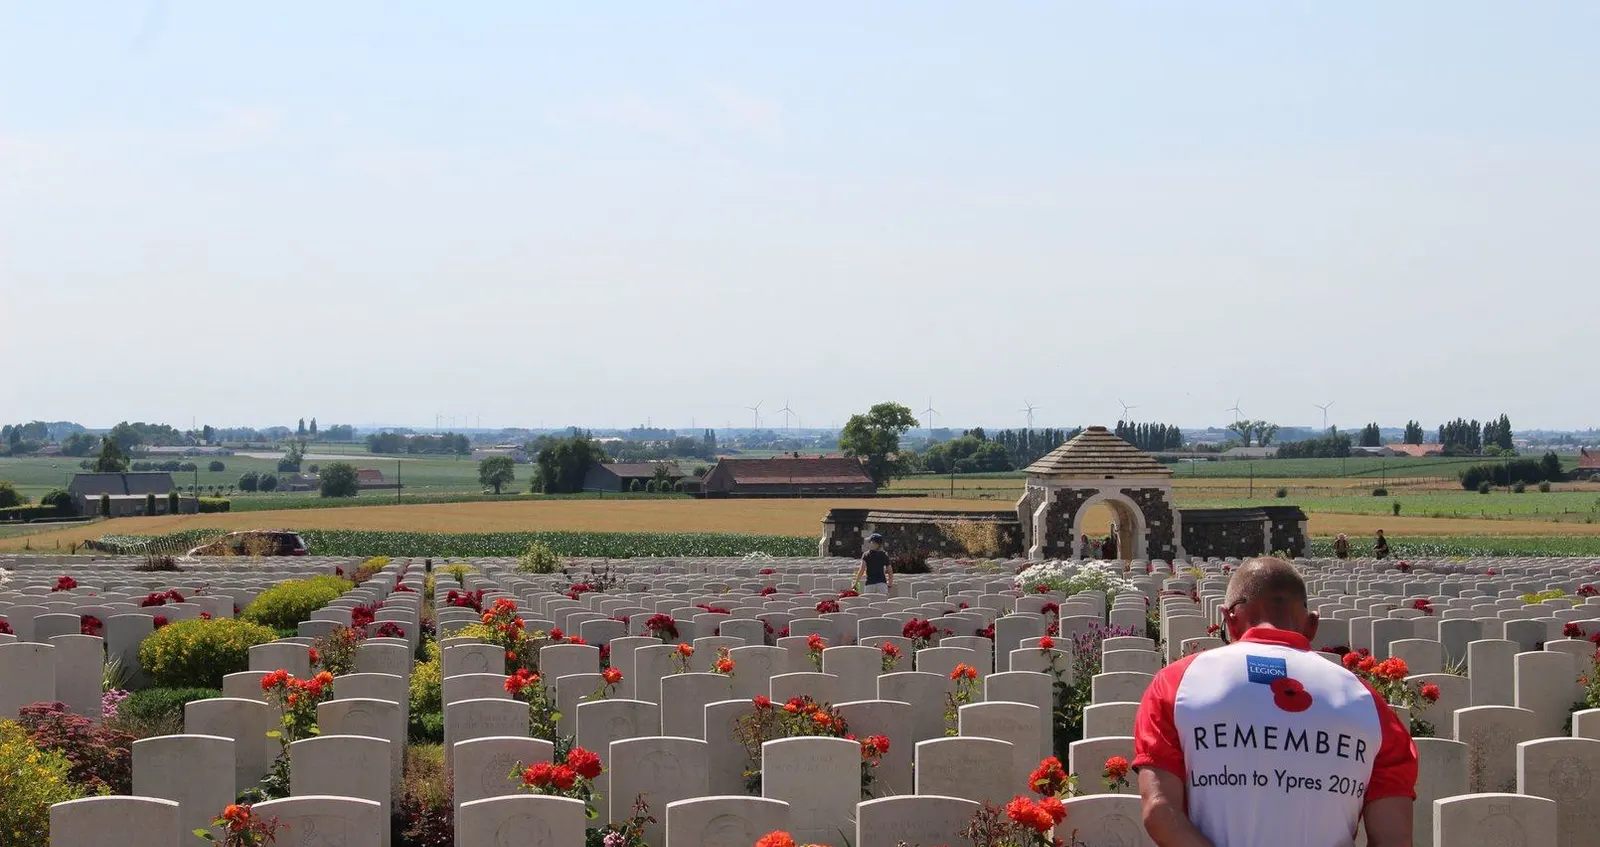 Cyclist from Pedal to Ypres ride at a graveyard in Ypres